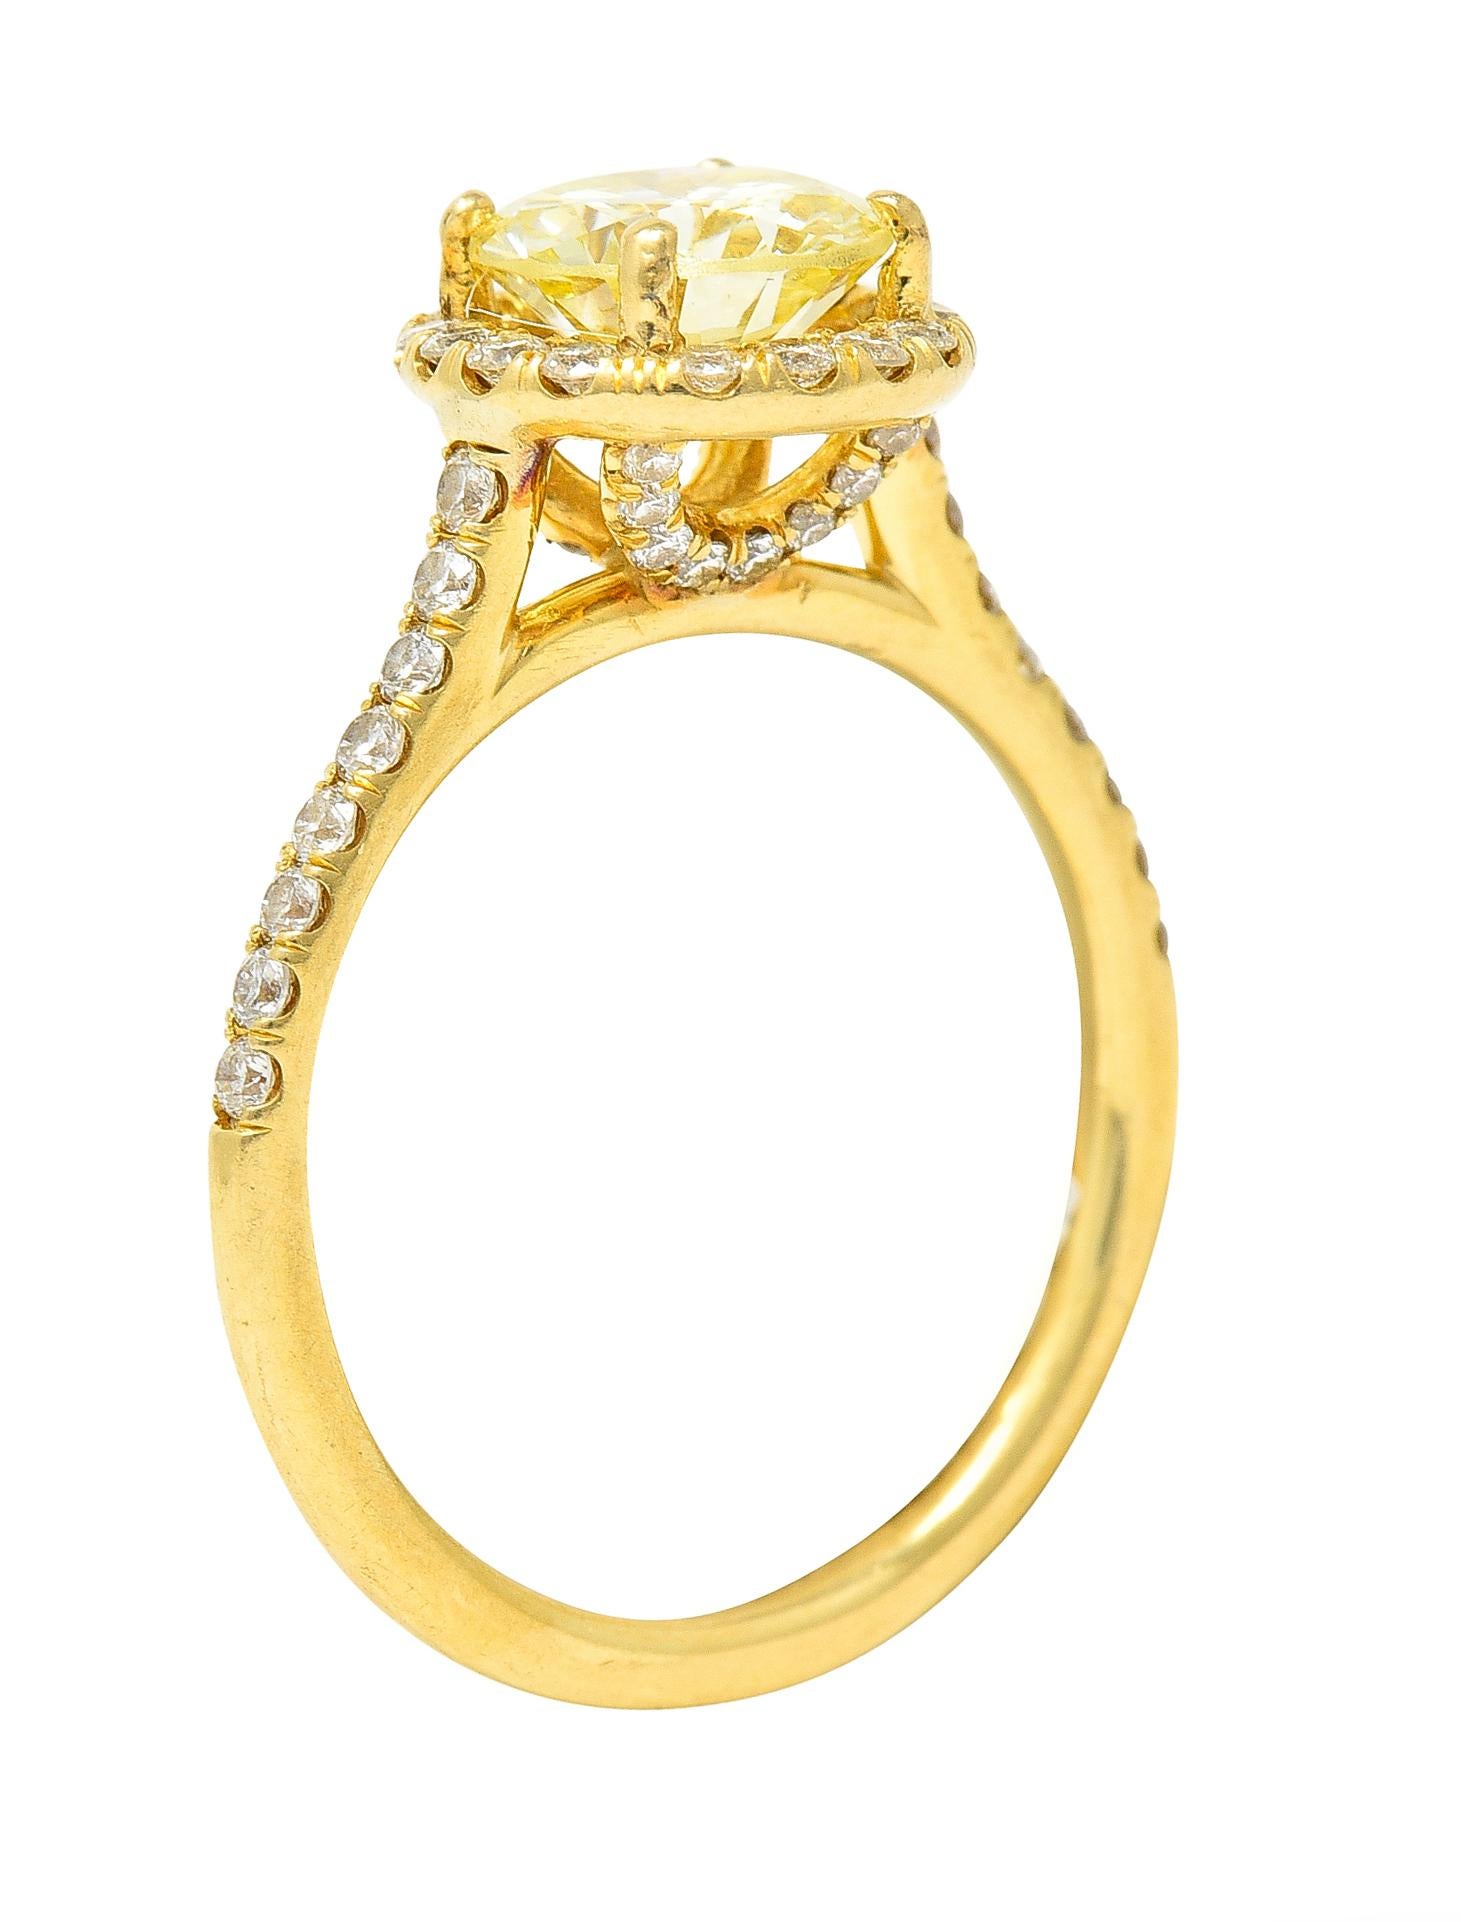 Centering a round brilliant cut diamond weighing 1.09 carats total. Natural fancy light yellow in color with VS2 clarity - prong set. Accented by recessed halo surround and cathedral shoulders. Featuring prong set round brilliant cut diamonds